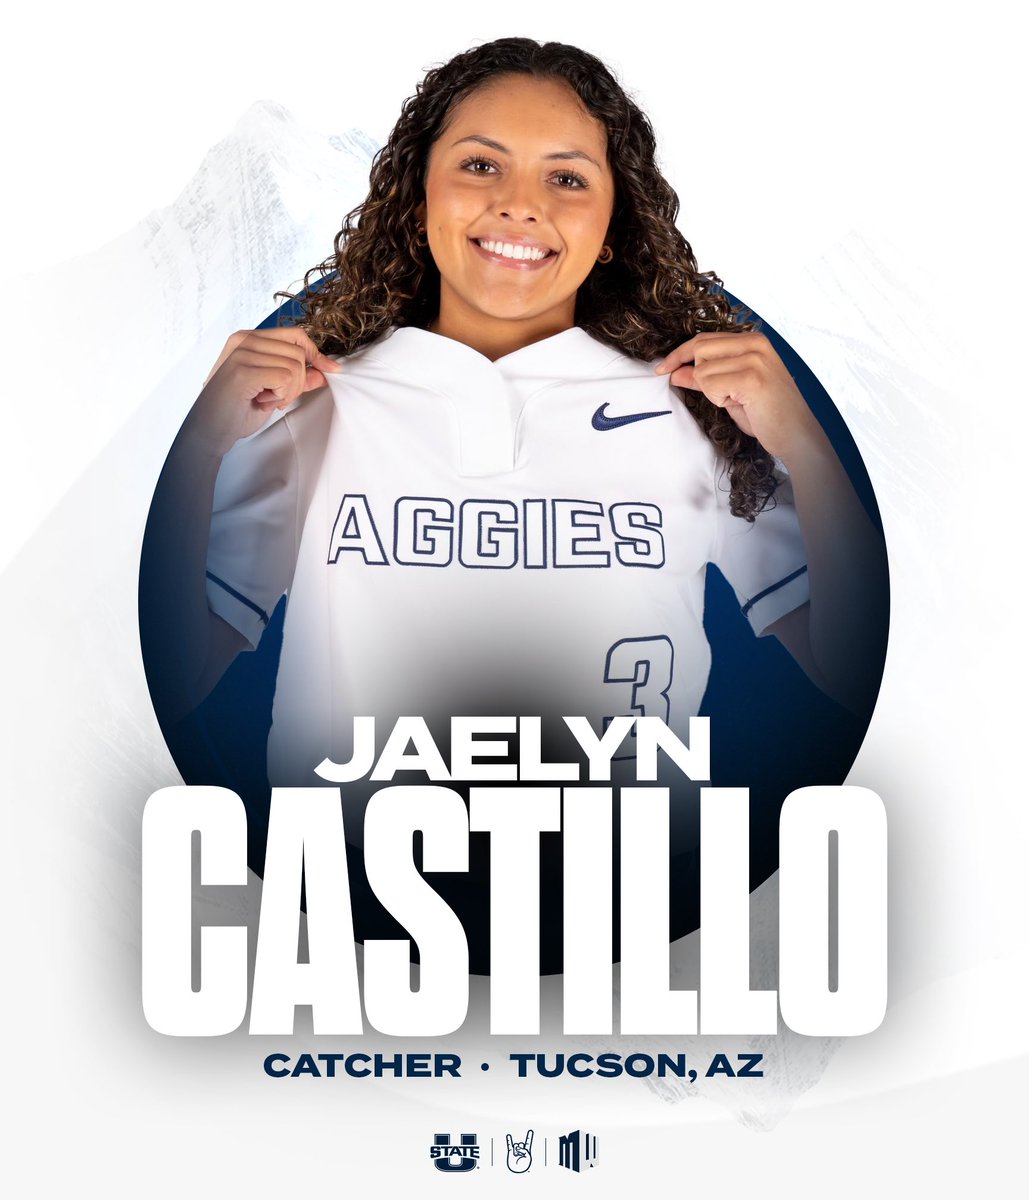 𝓢𝓲𝓰𝓷𝓮𝓭 ✍️ Welcome to the Aggie Family, Jaelyn! #AggiesAllTheWay